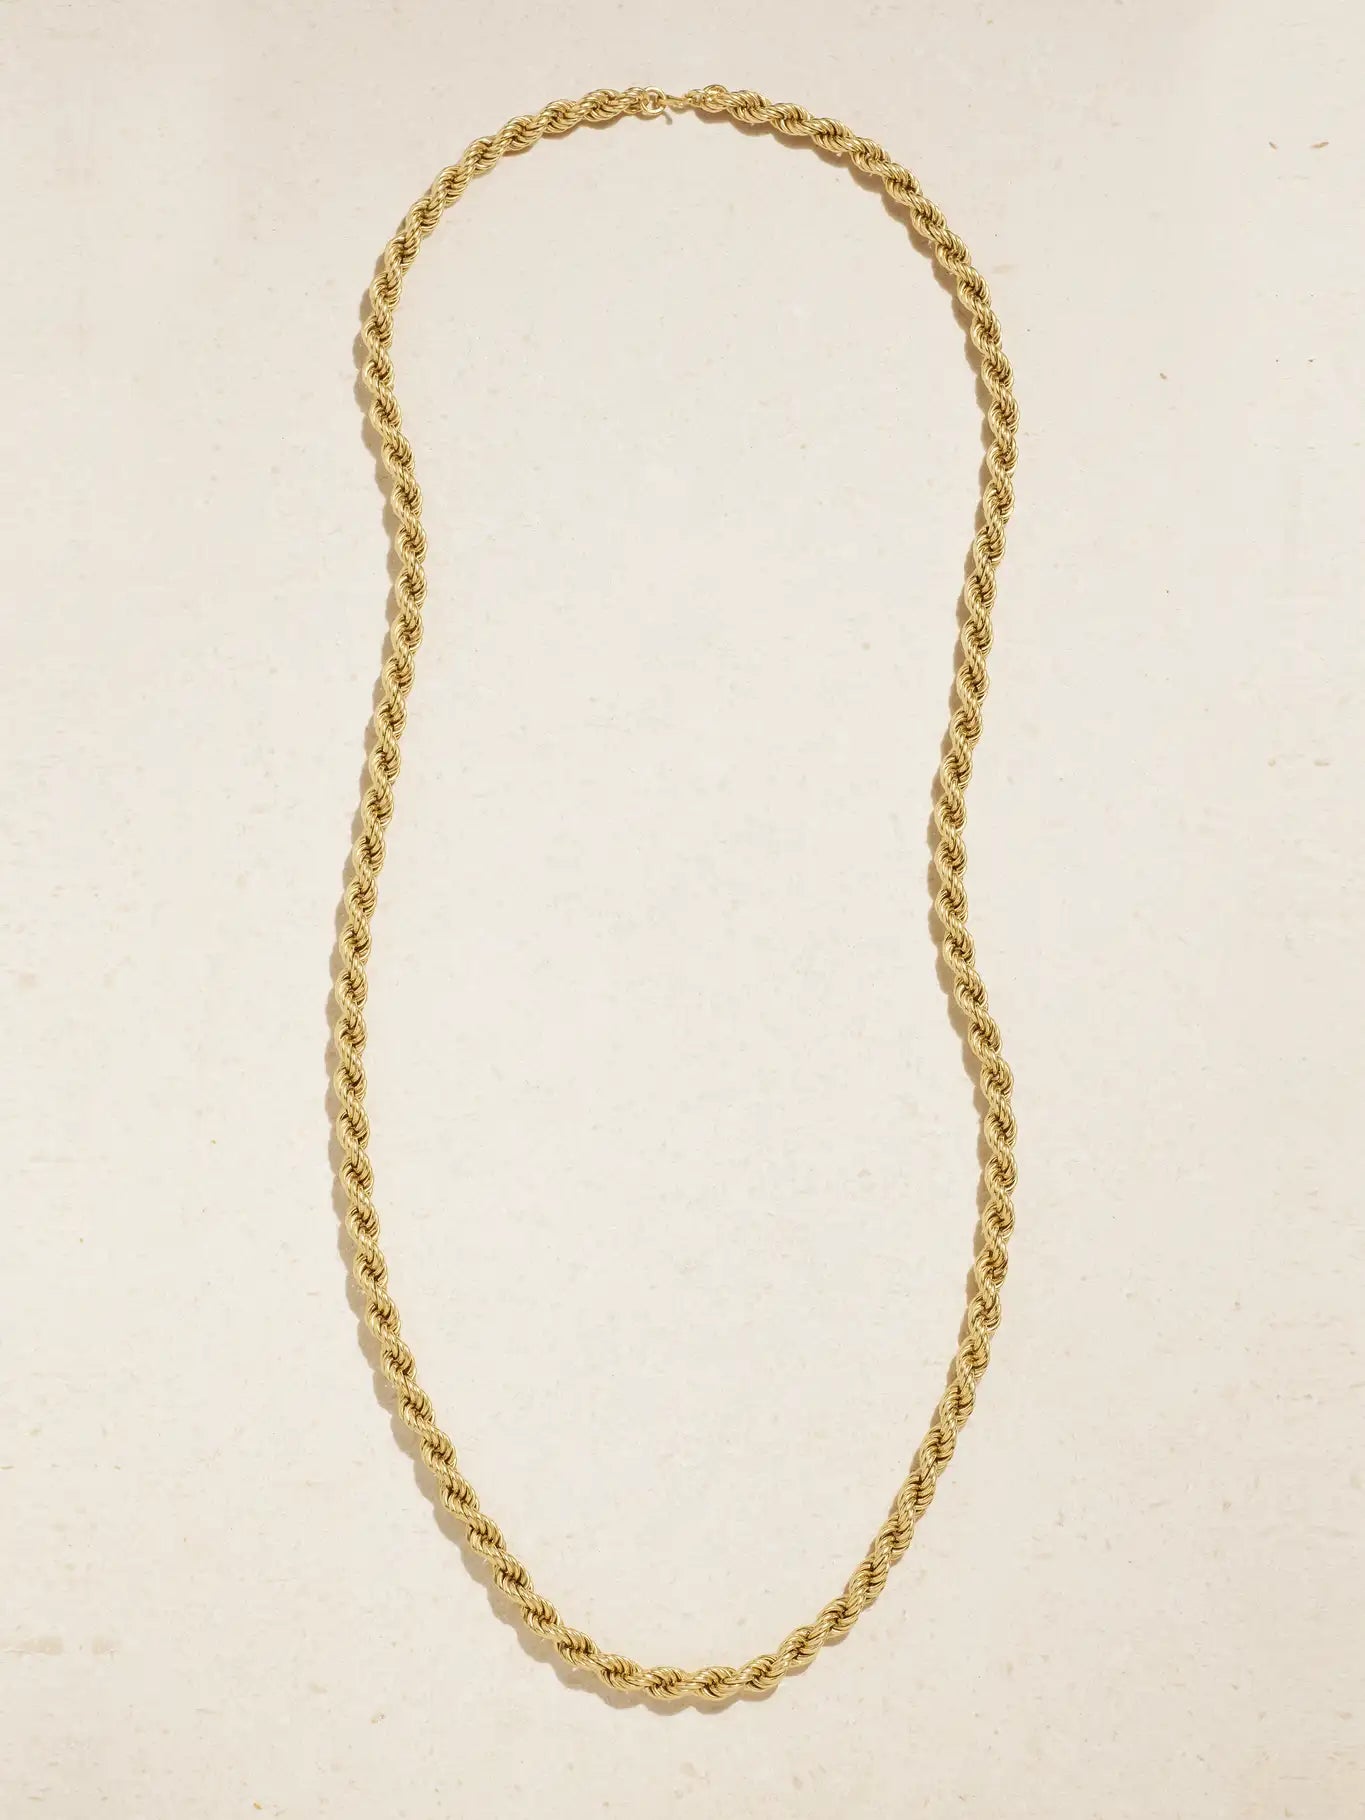 VINTAGE SOLID 18K YELLOW GOLD ROPE CHAIN c.1980s